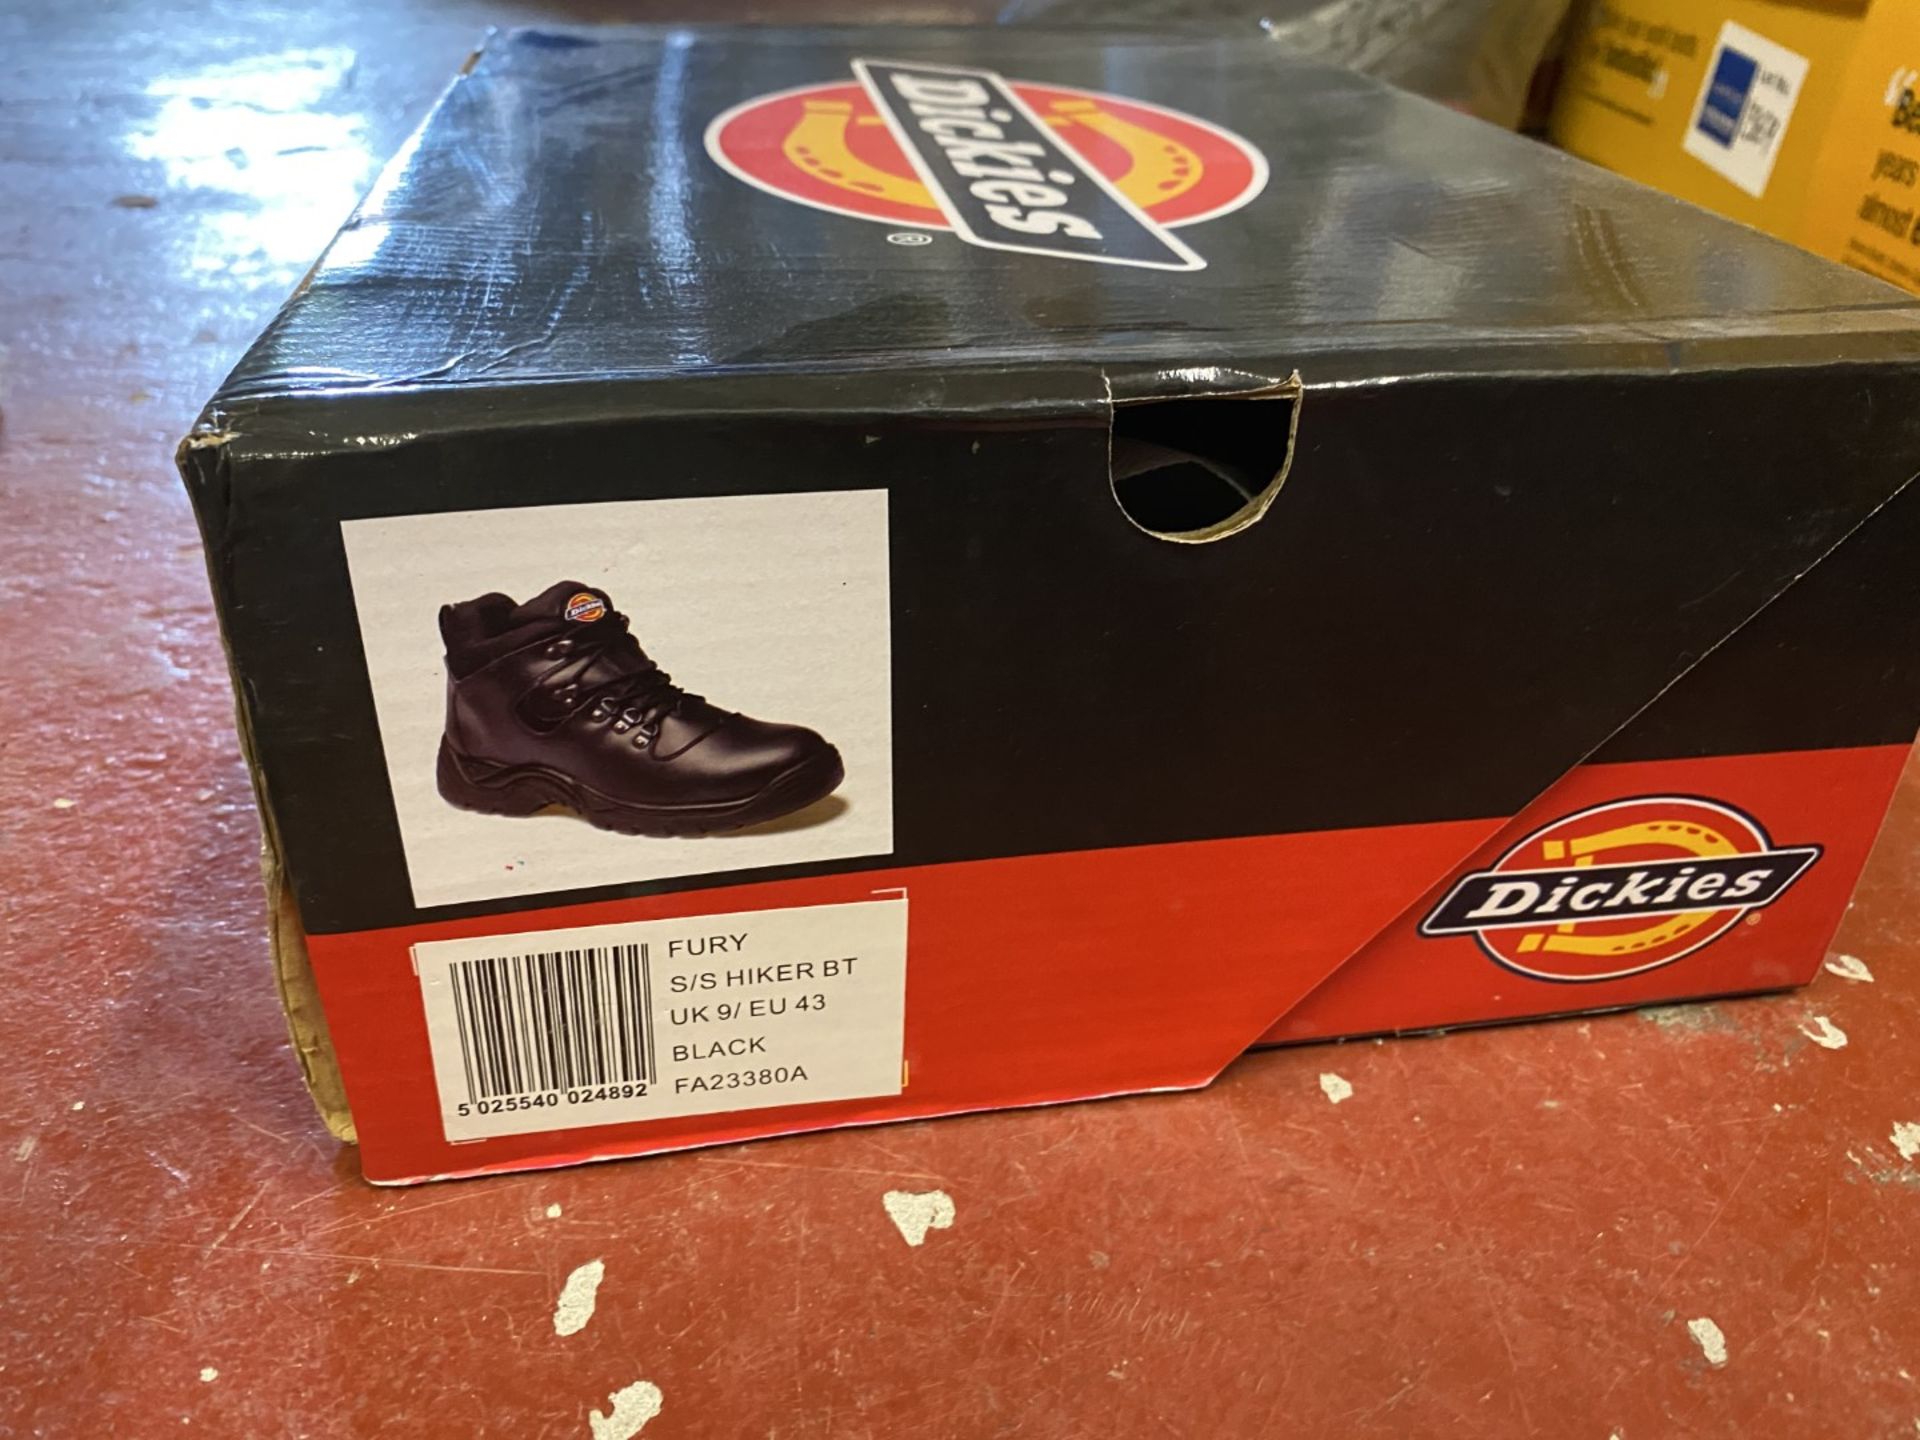 NEW Dickies safety boots, UK size 9